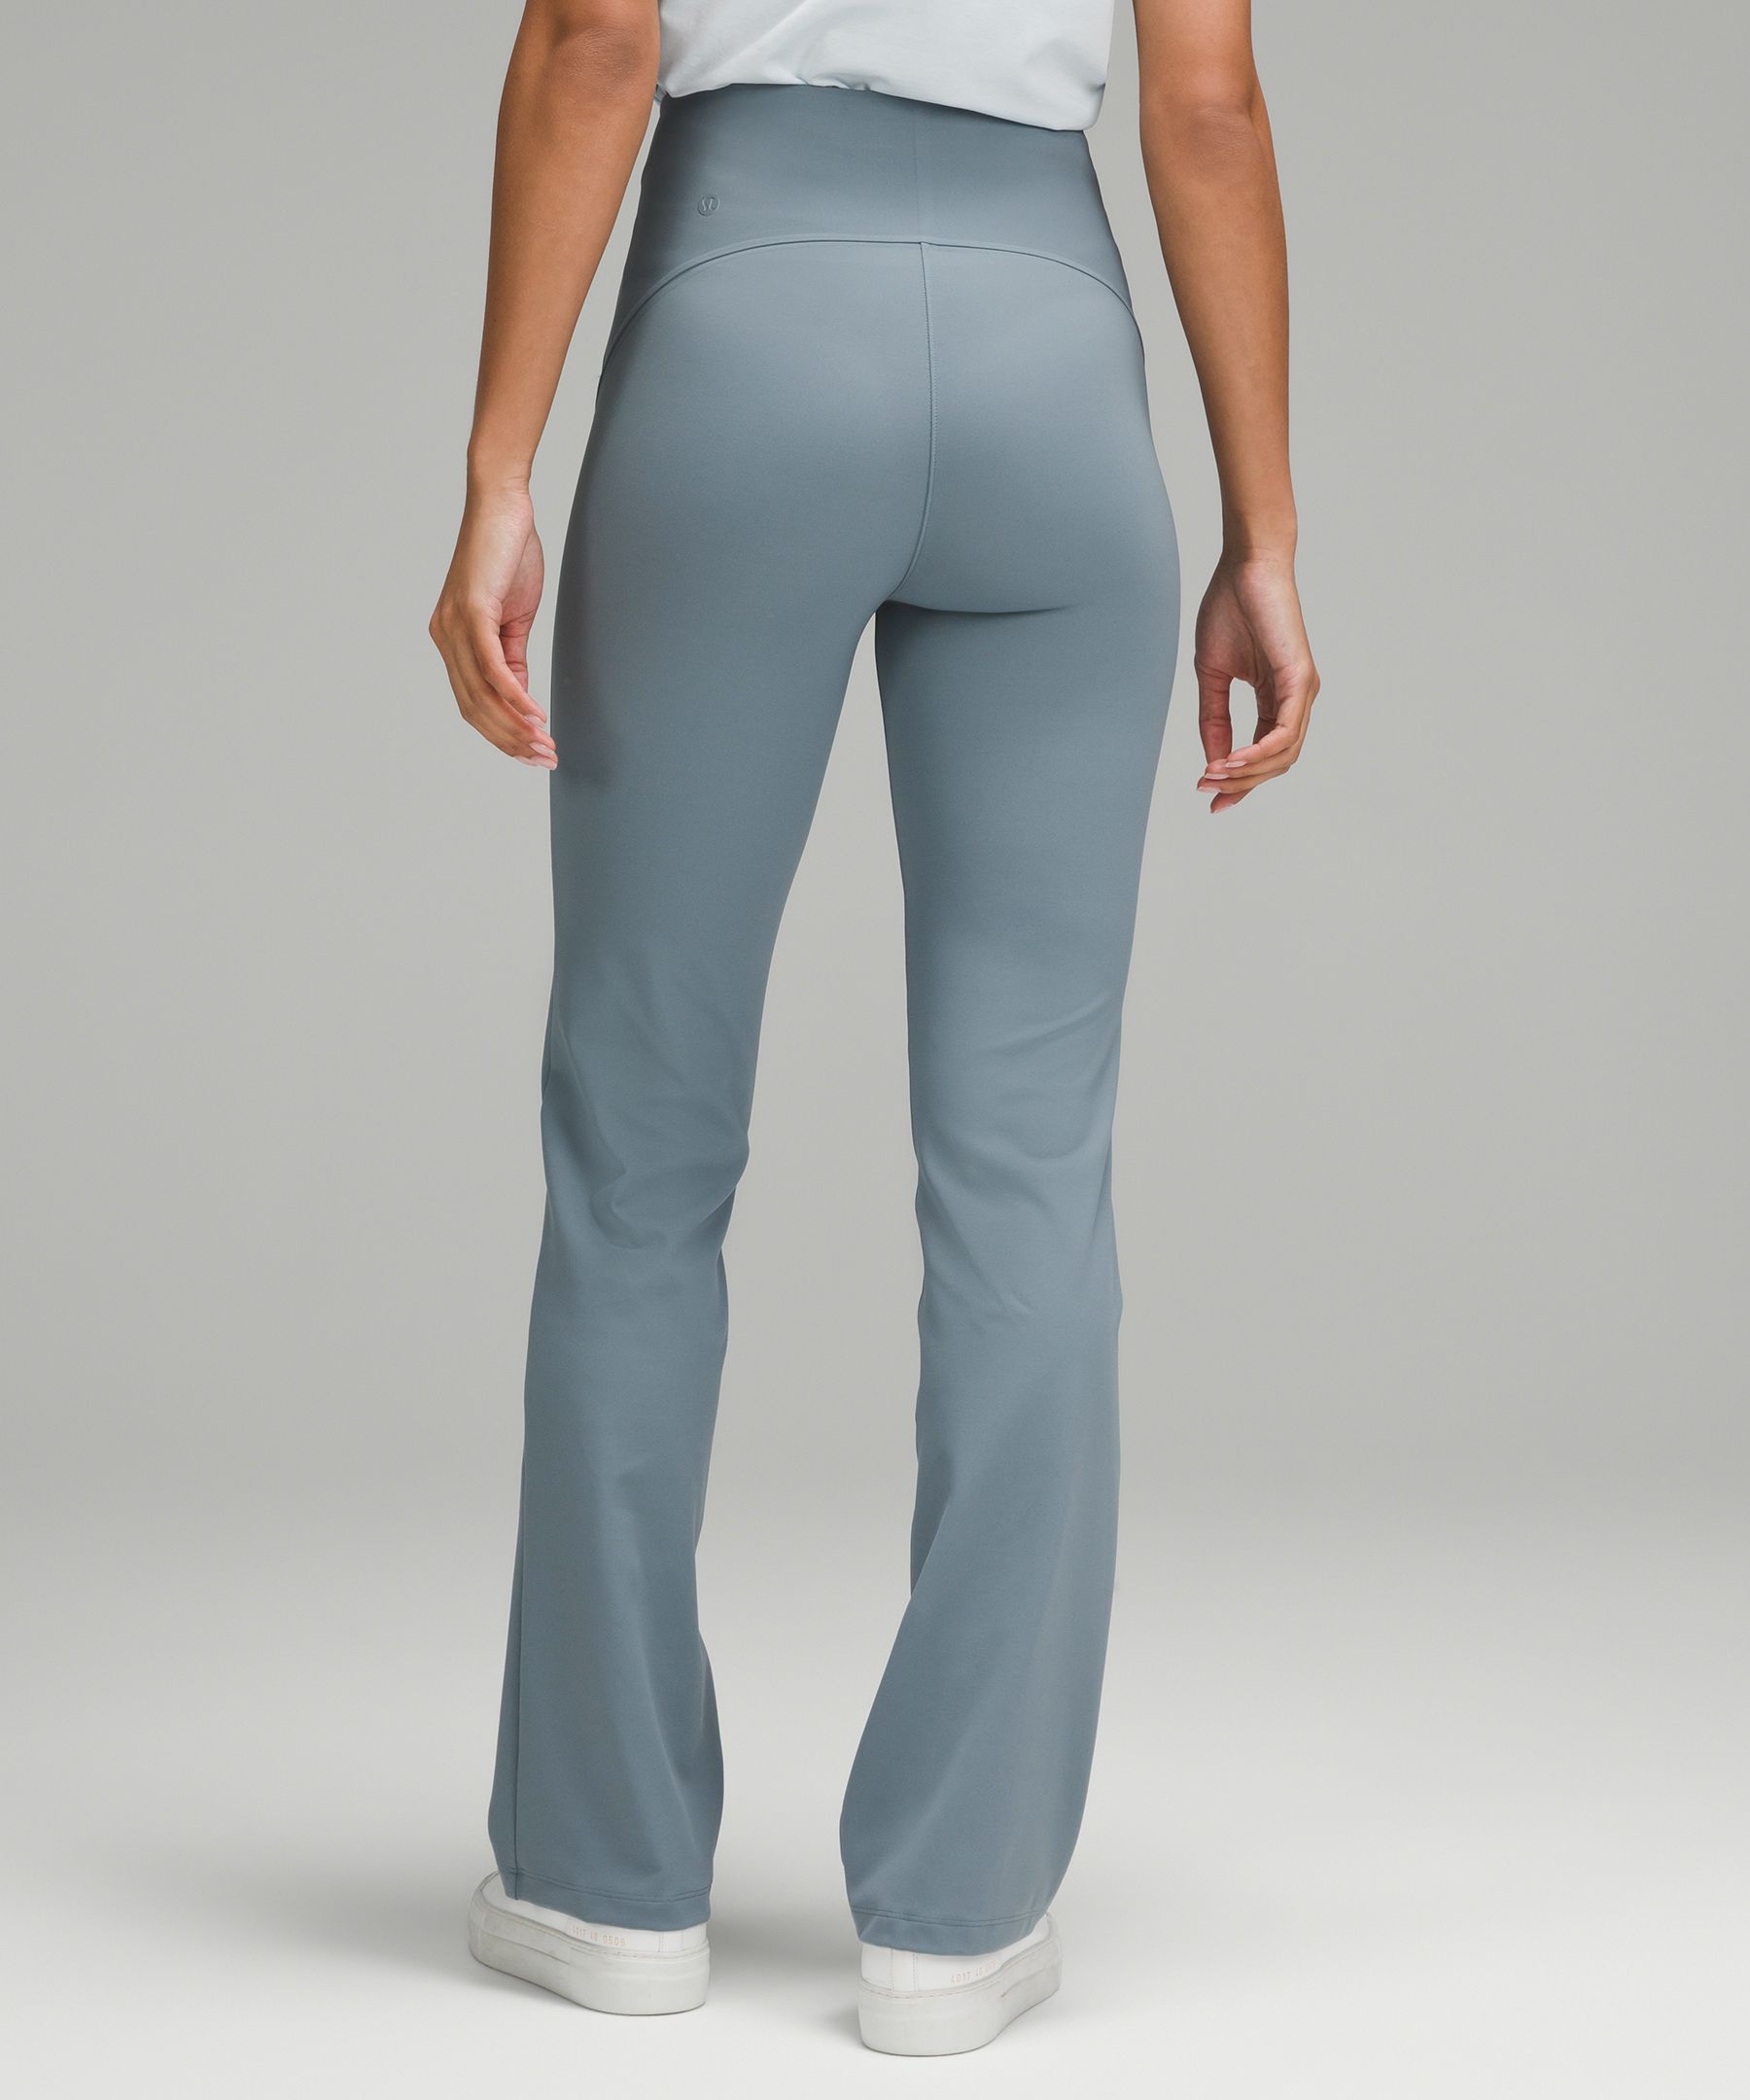 Lululemon athletica Smooth Fit Pull-On High-Rise Pant